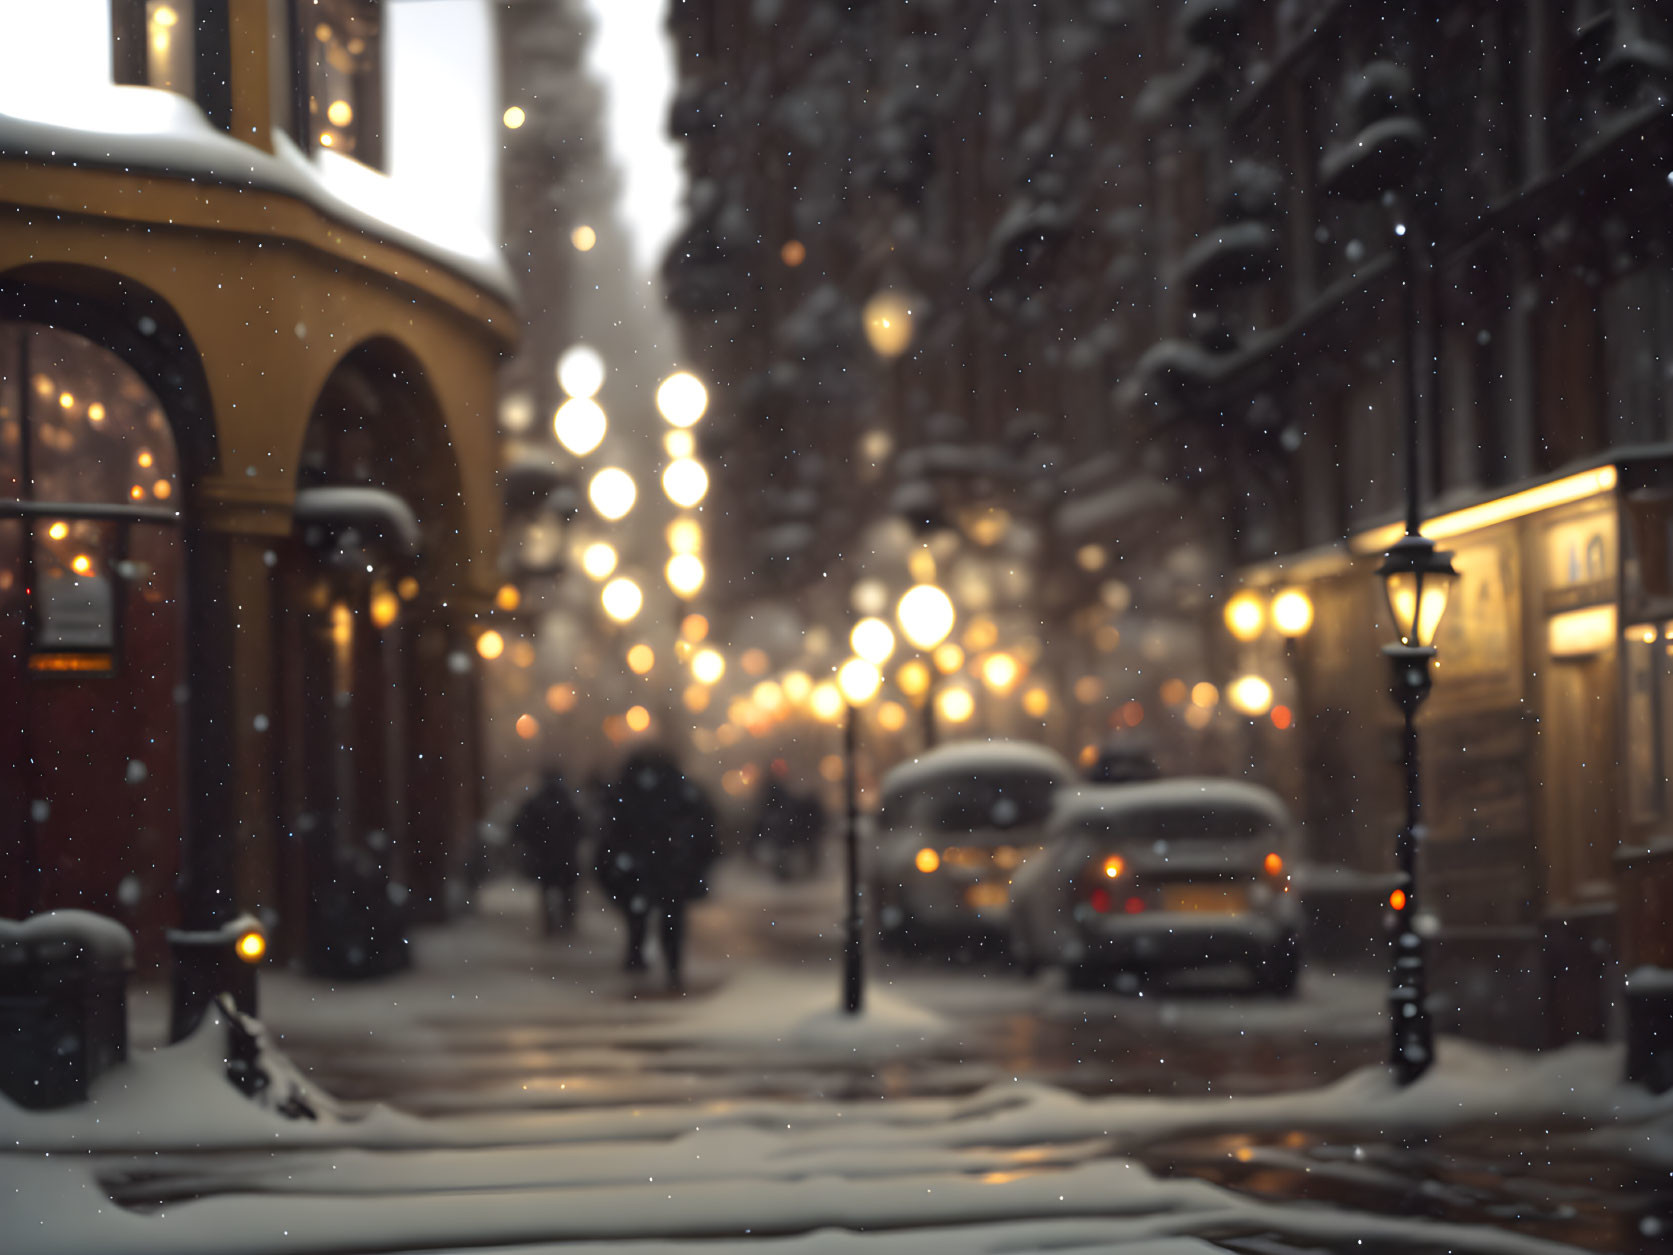 Snowy City Scene at Dusk: Blurred Lights & Silhouettes of People Walking